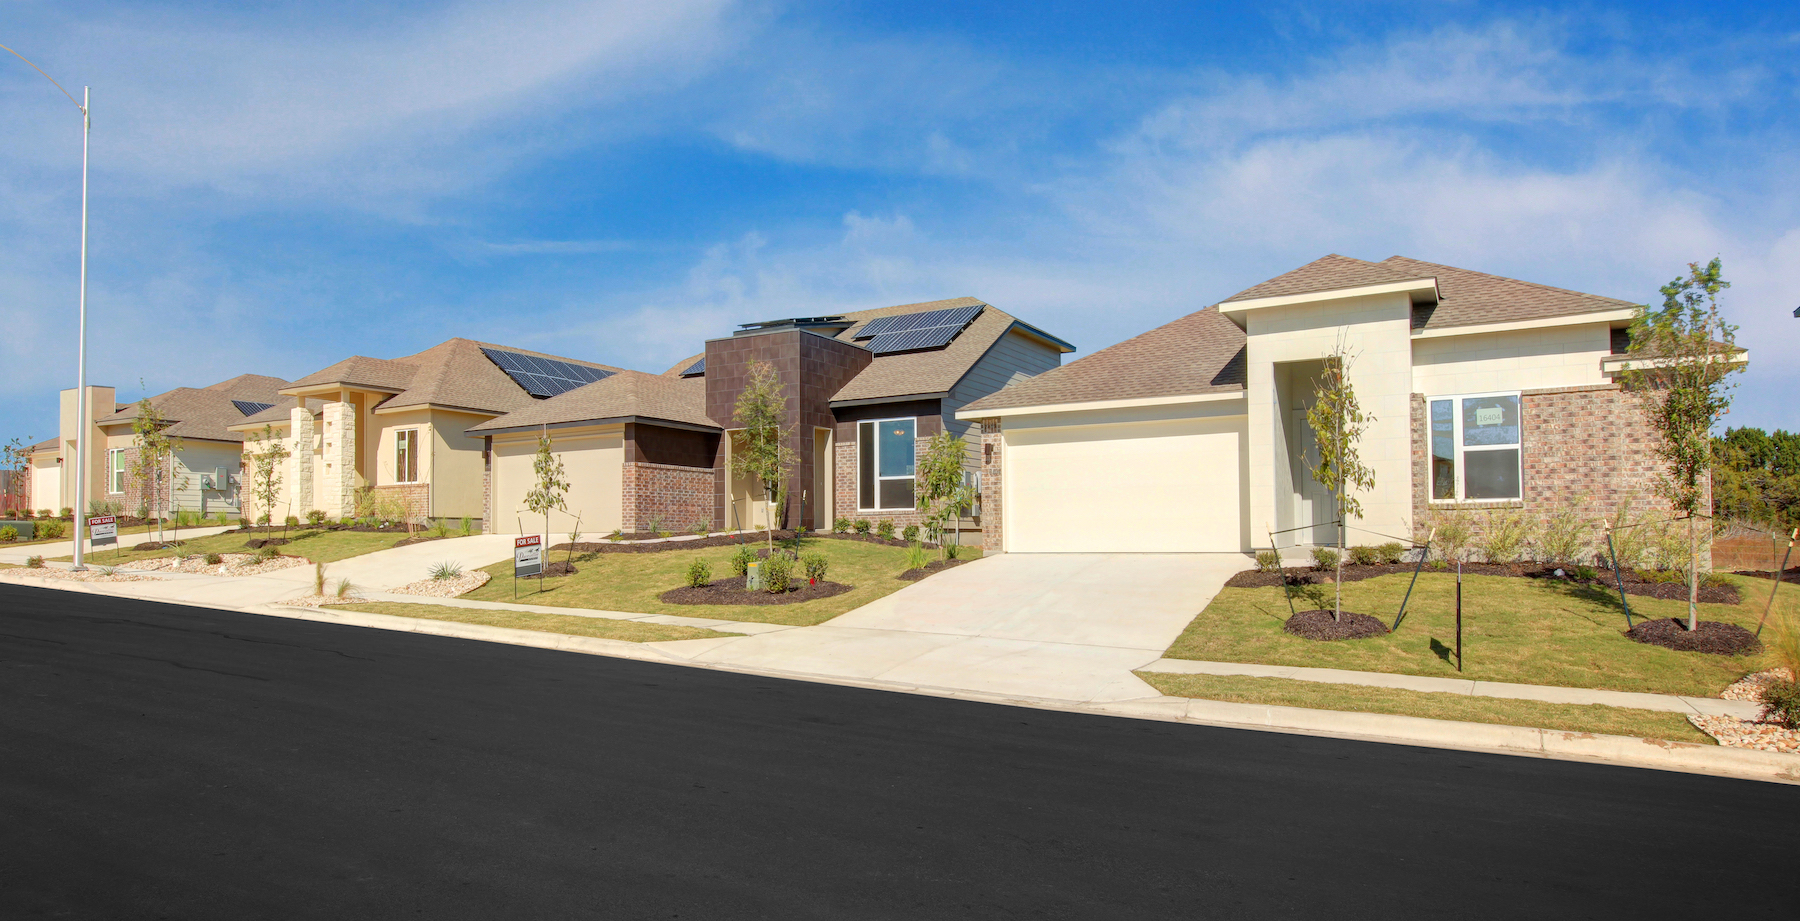 In Austin, Texas, Taurus’s Whisper Valley community will include 7,500 net zero energy ready homes featuring solar panels and geothermal technology. Photo: Taurus of Texas Holdings